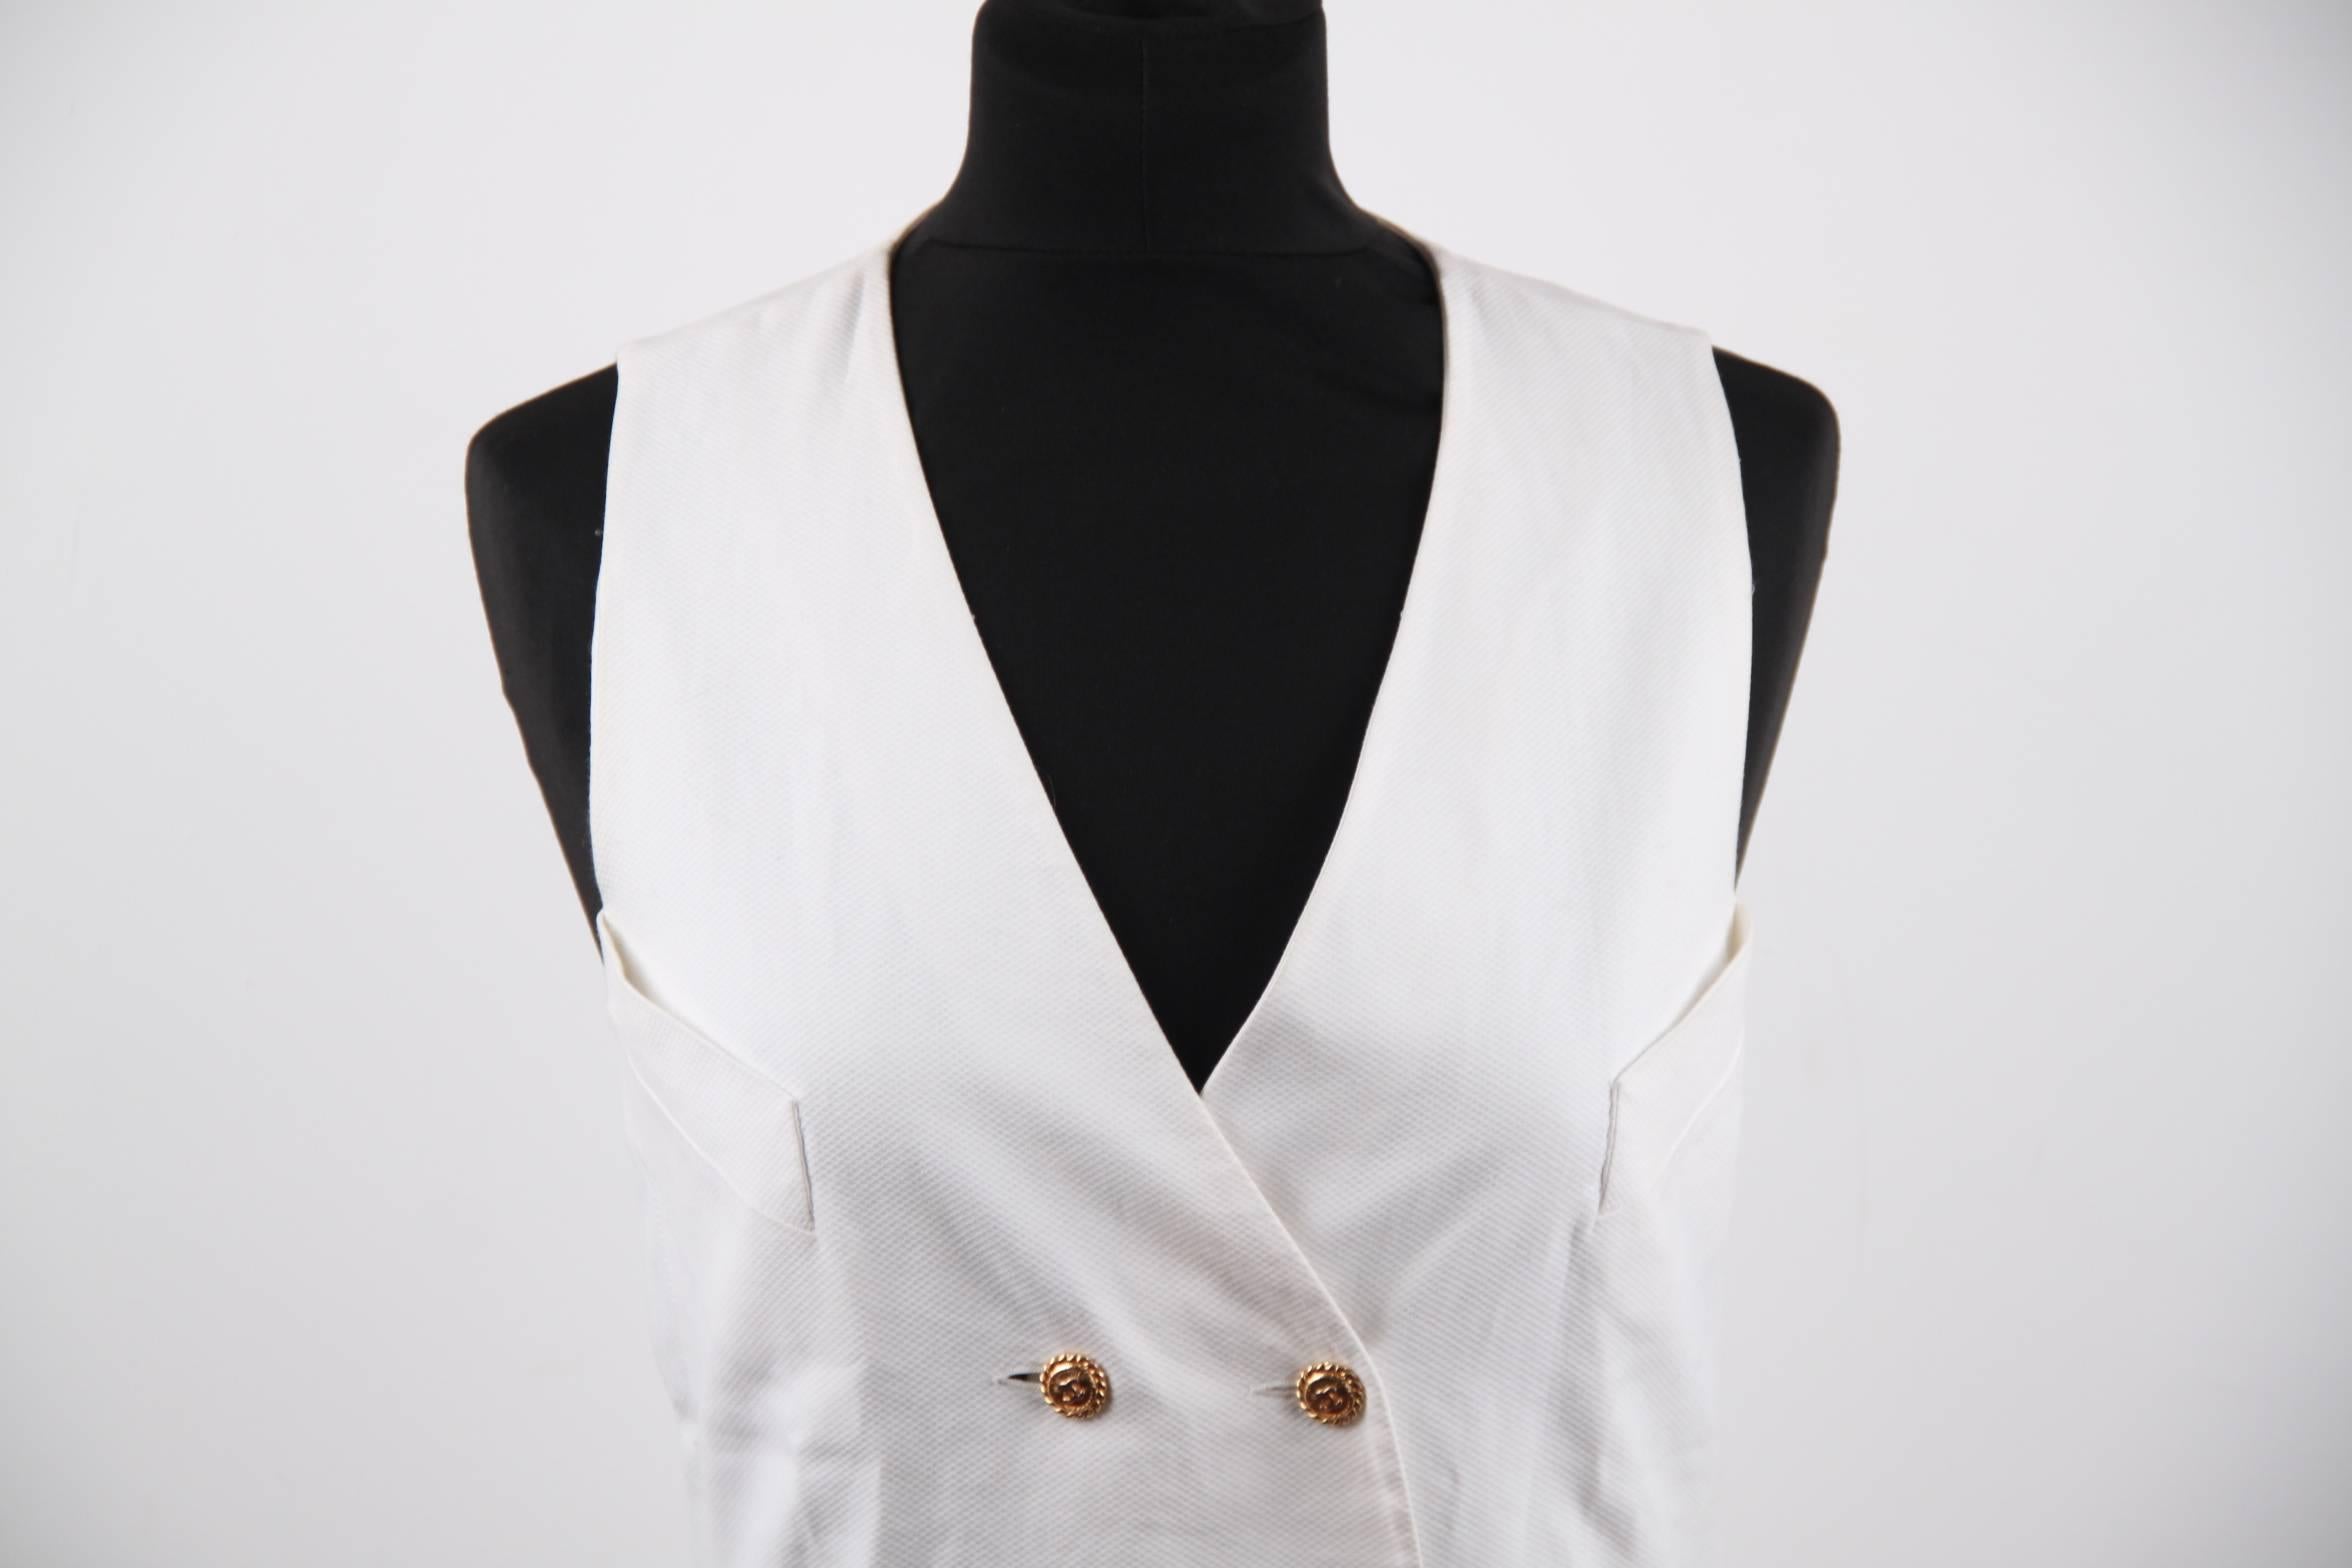 Women's CHANEL BOUTIQUE White DOUBLE BREASTED VEST Waistcoat w/ CC LOGO Buttons